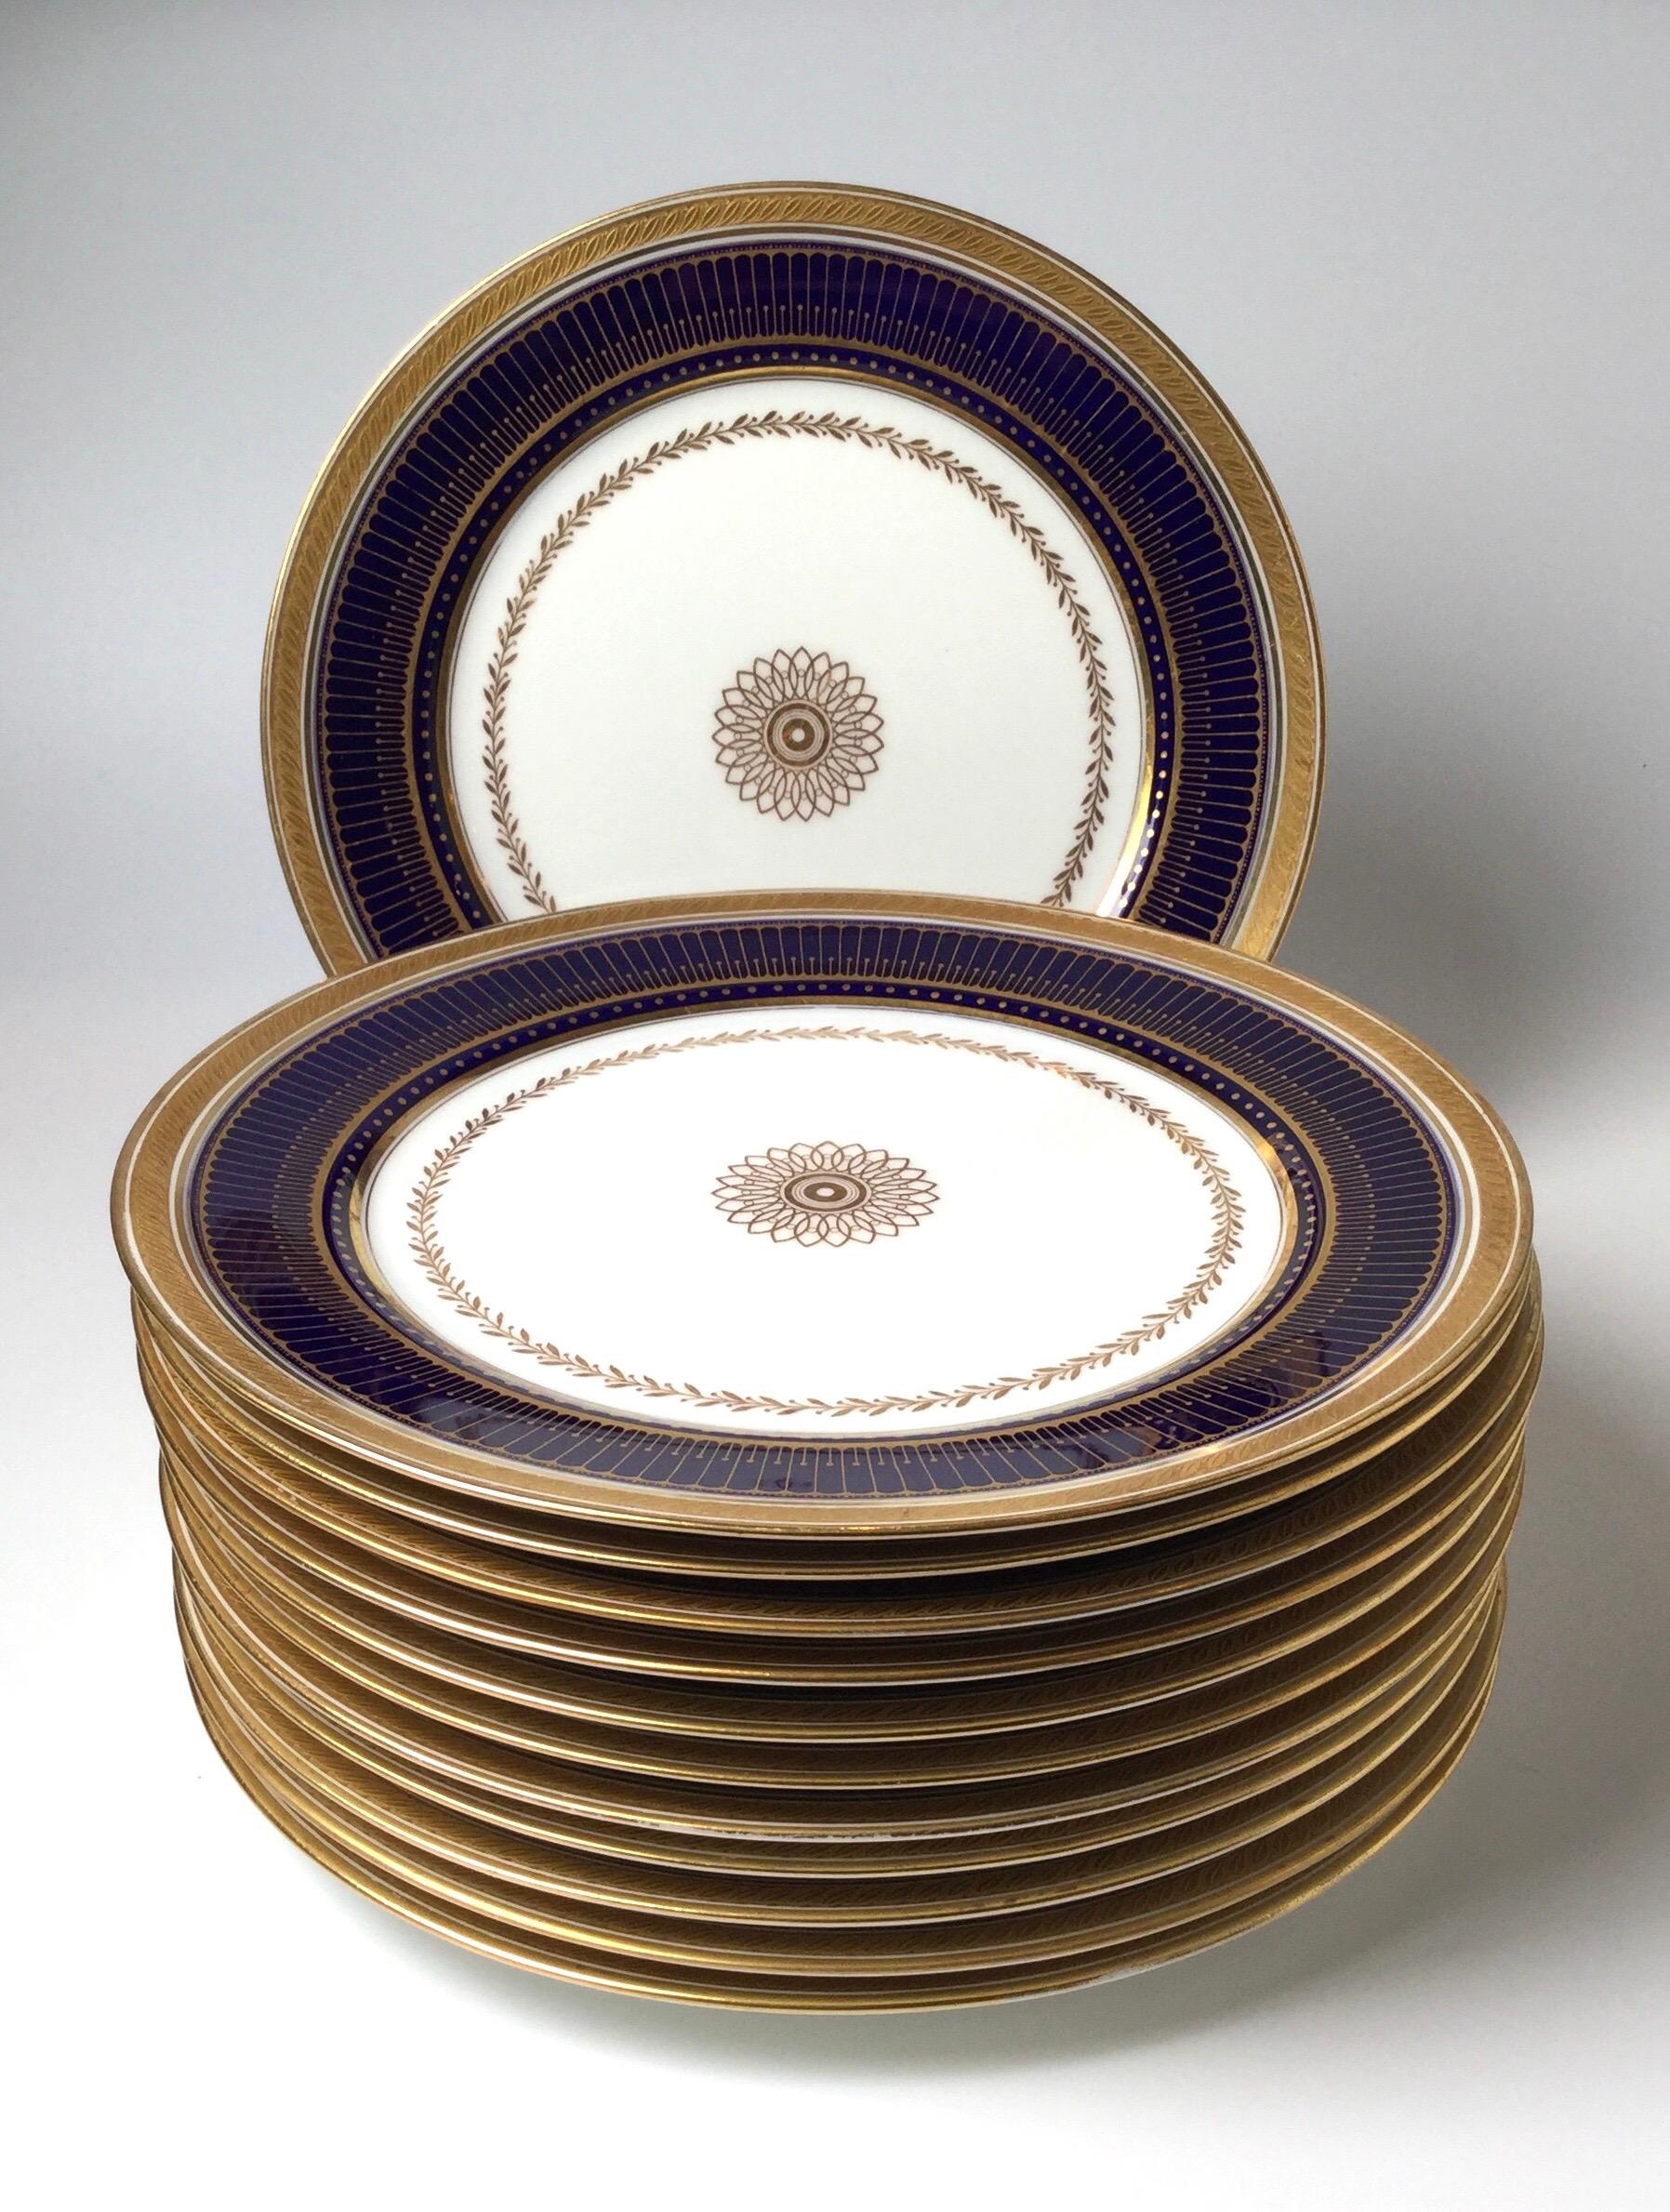 Set of twelve gold gilt and cobalt service plates BWM & Co for Gillman, NYC, the cobalt band highlighted by gold with a central starburst medallion.
In very good original condition, circa early 1900s.